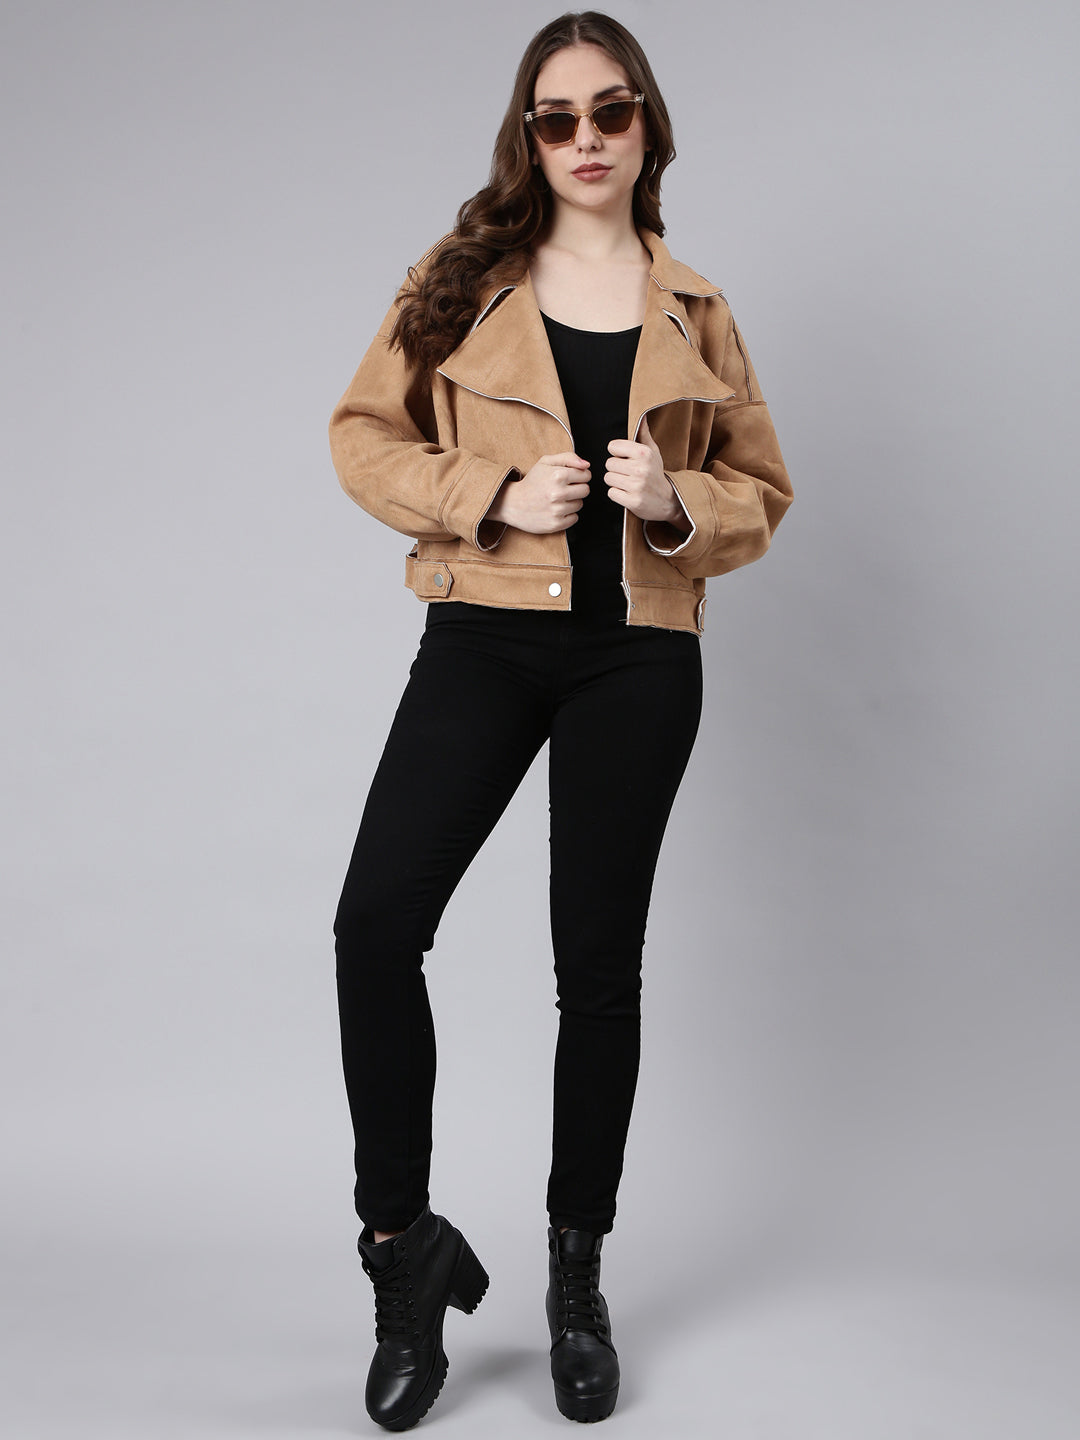 Women Solid Brown Tailored Jacket